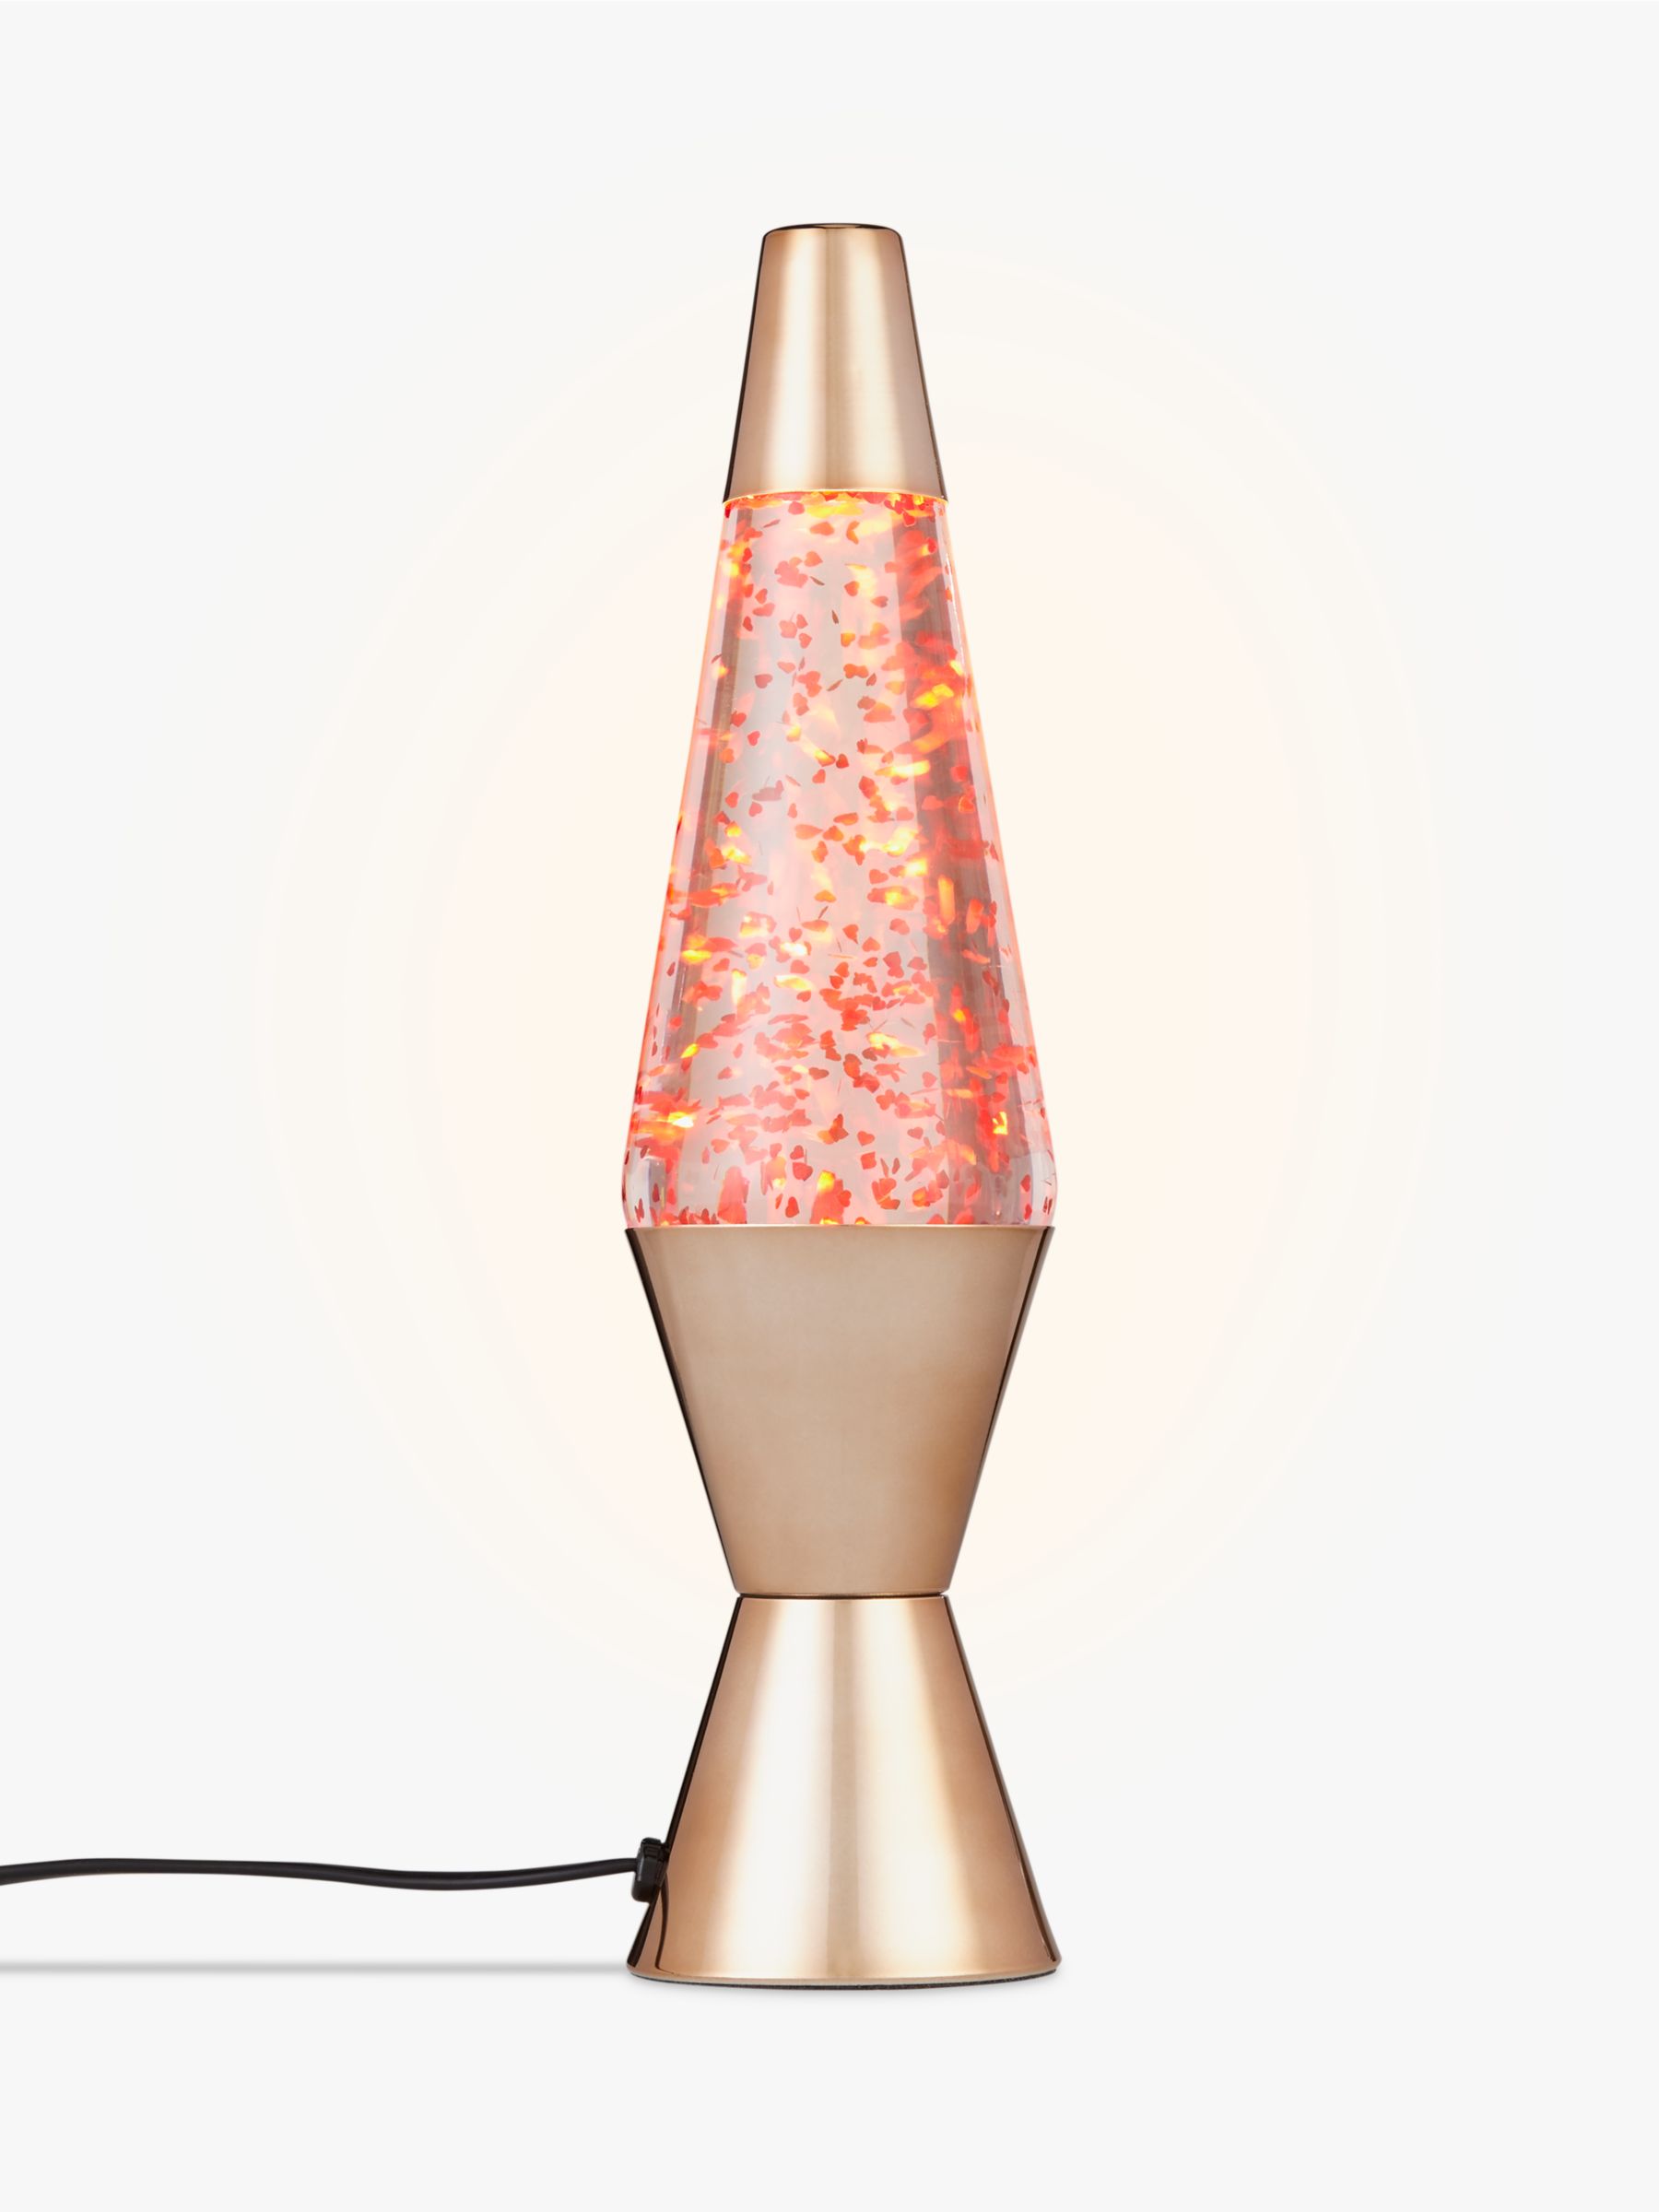 glitter table lamps